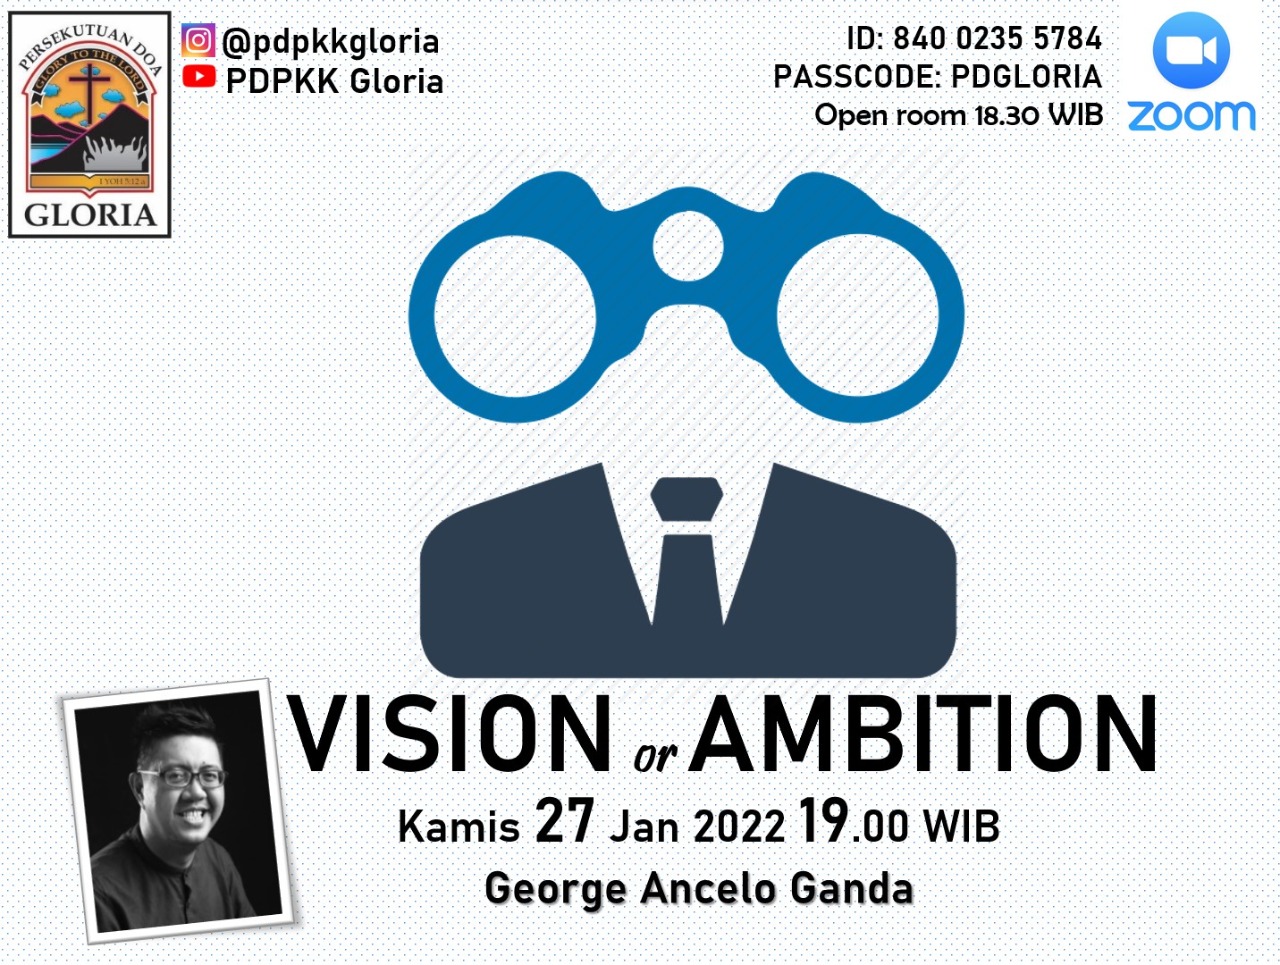 VISION OR AMBITION